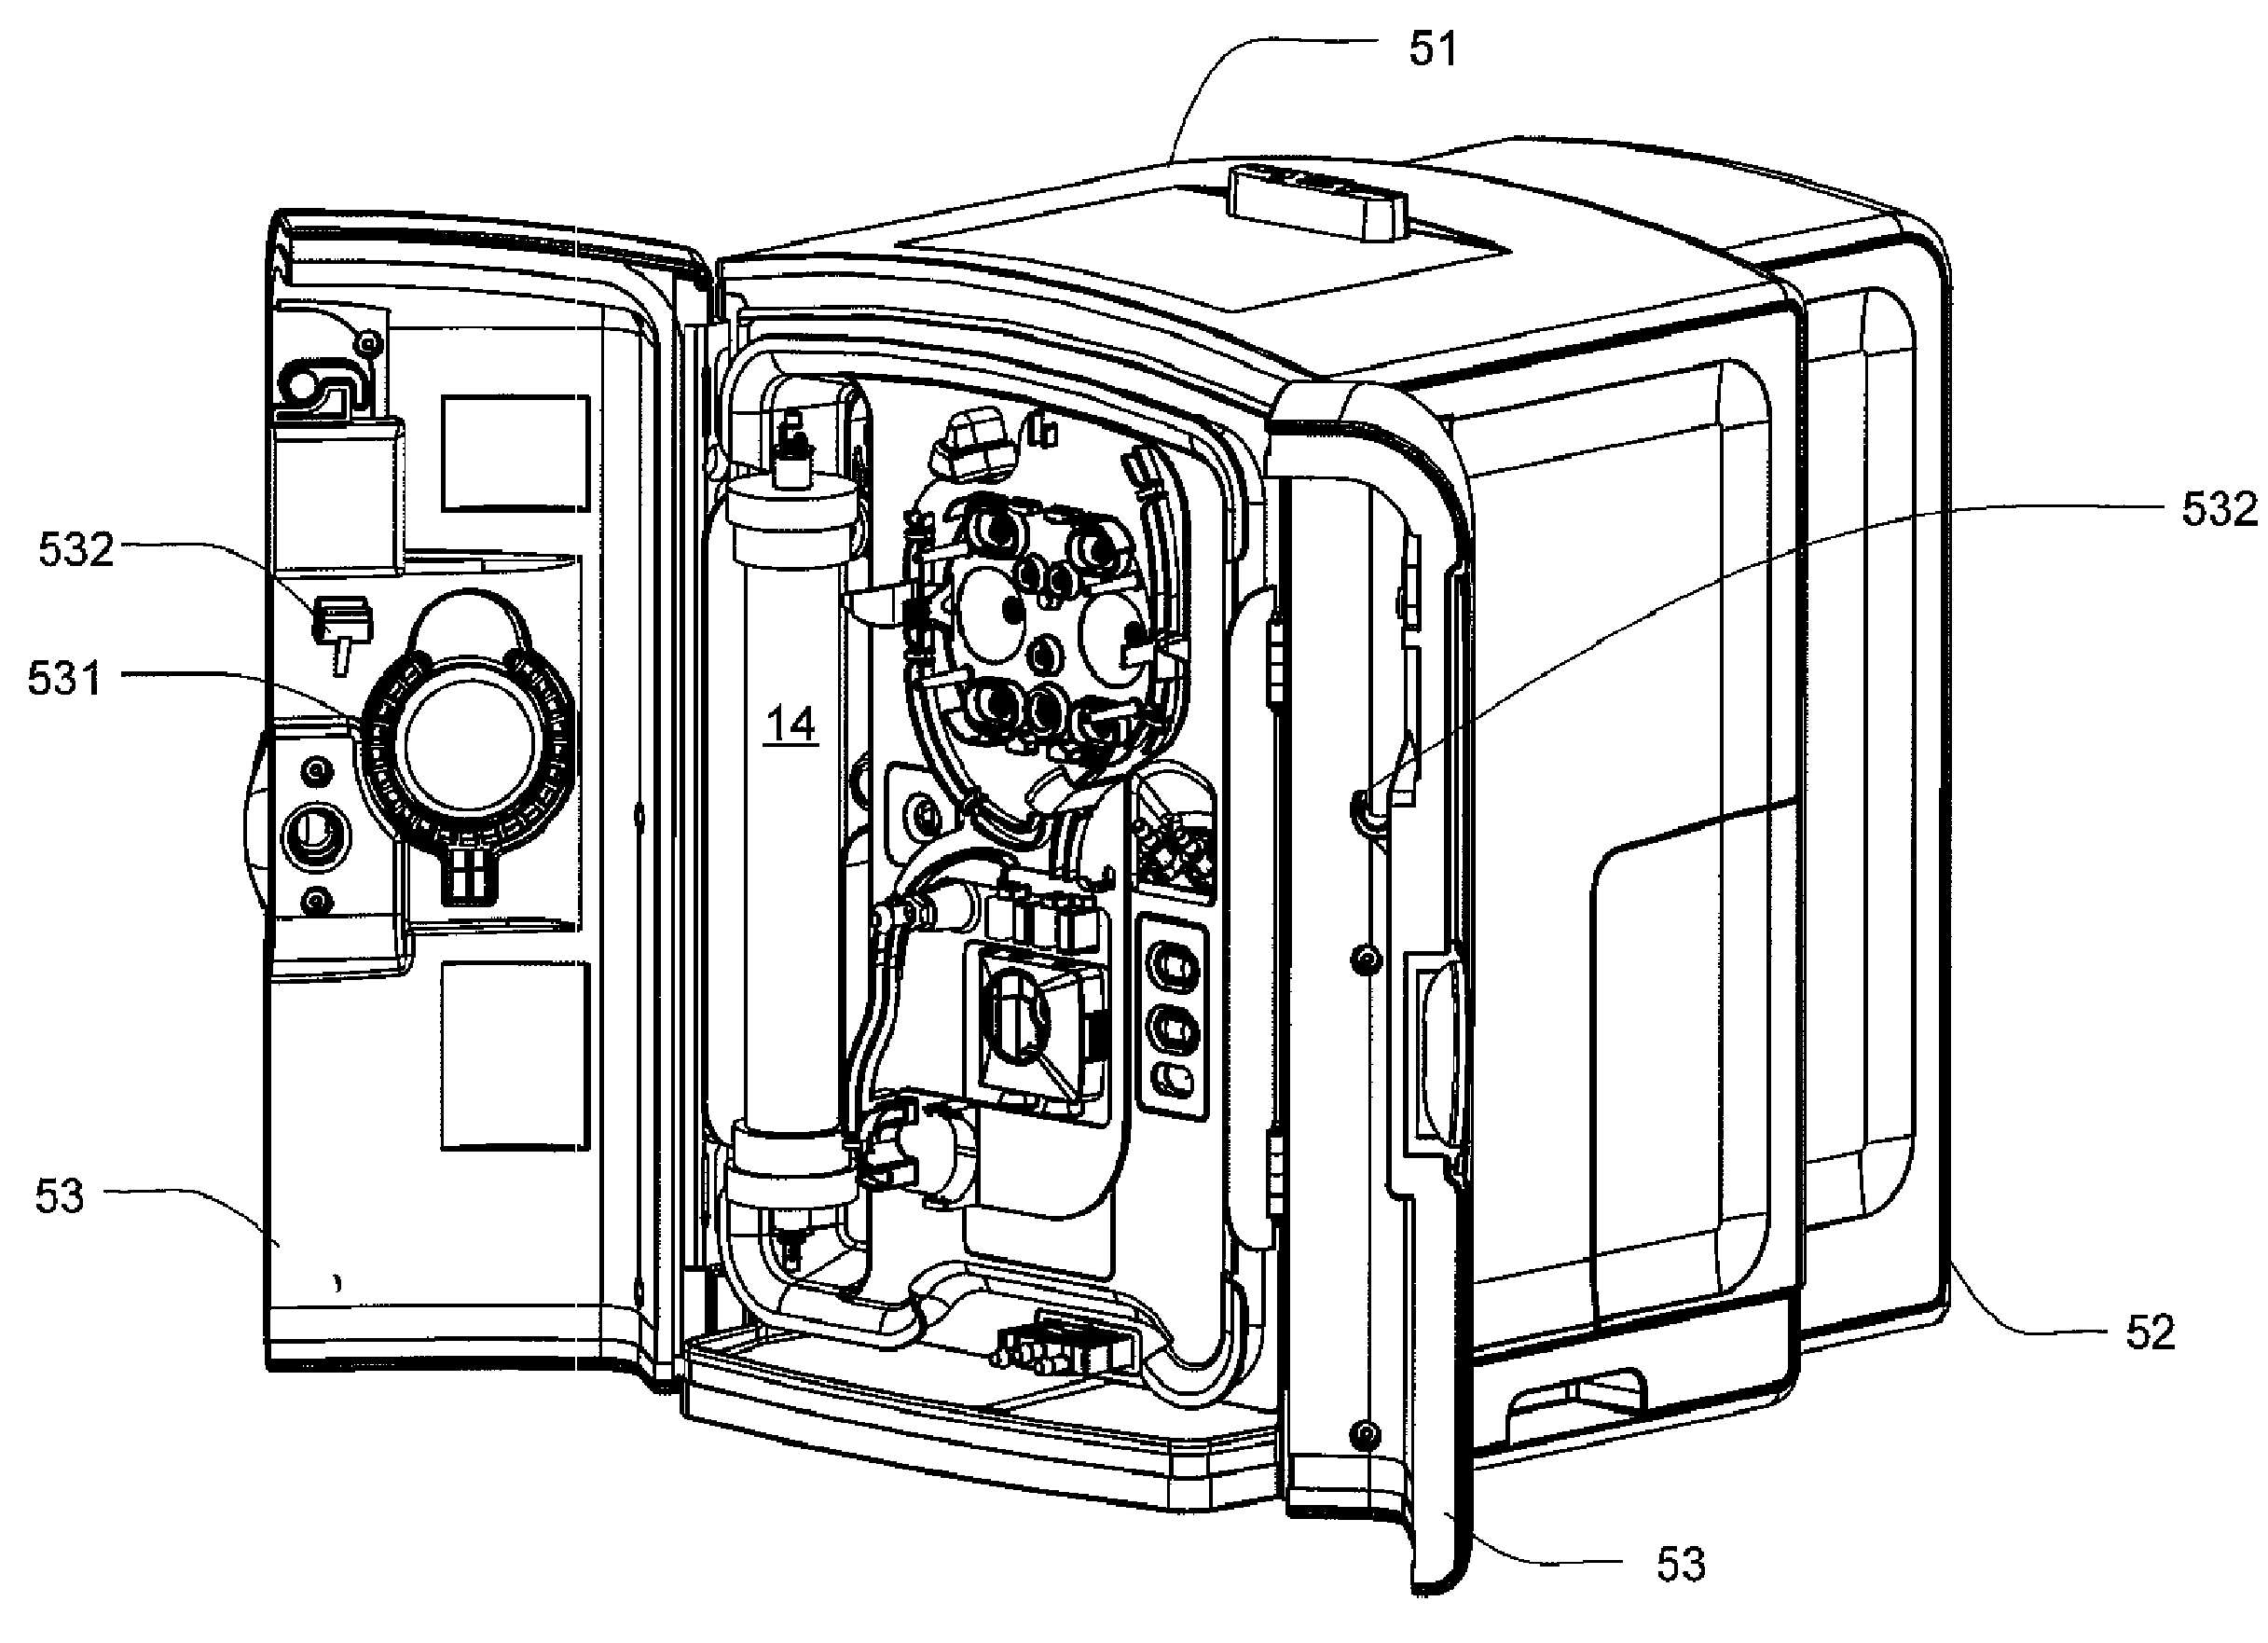 Enclosure for a portable hemodialysis system